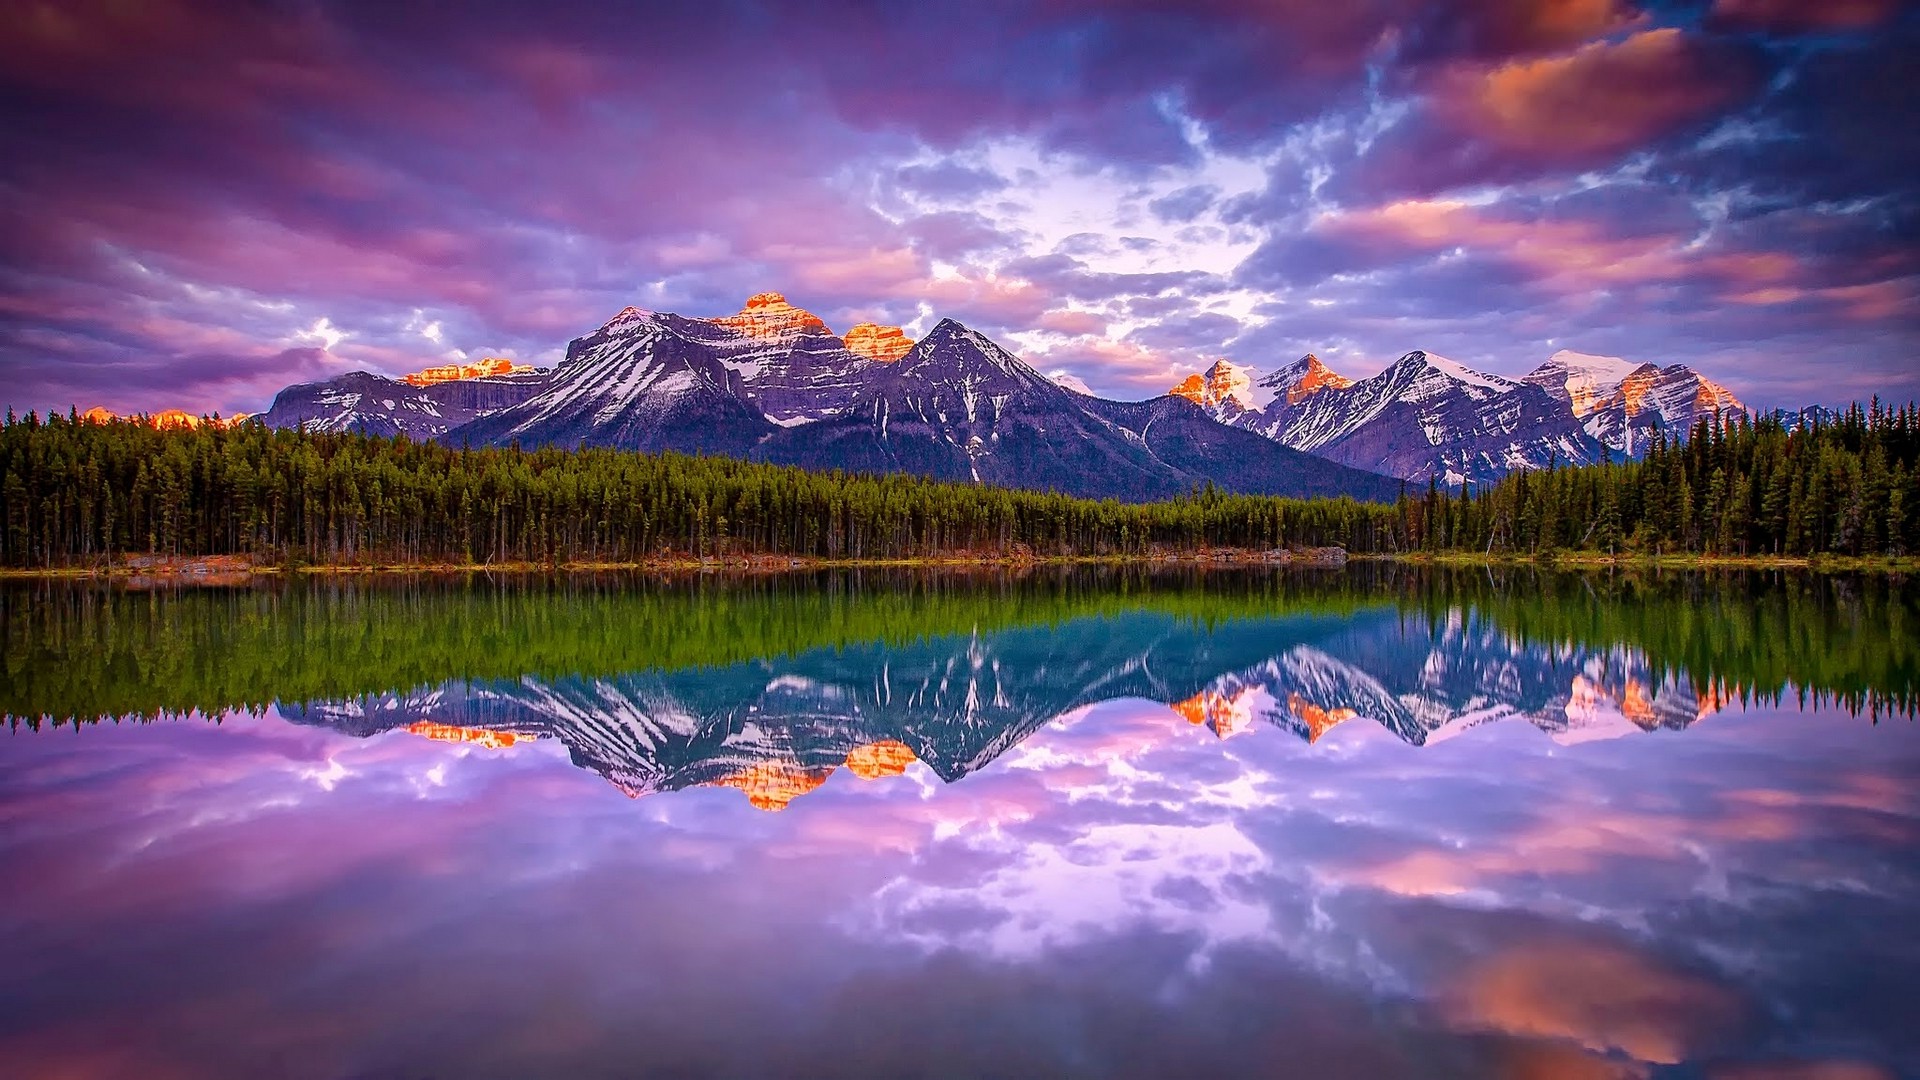 sunrise, Lake, Mountain, Forest, Nature, Landscape, Canada, Snowy Peak, Clouds, Reflection, Water, Calm Wallpaper